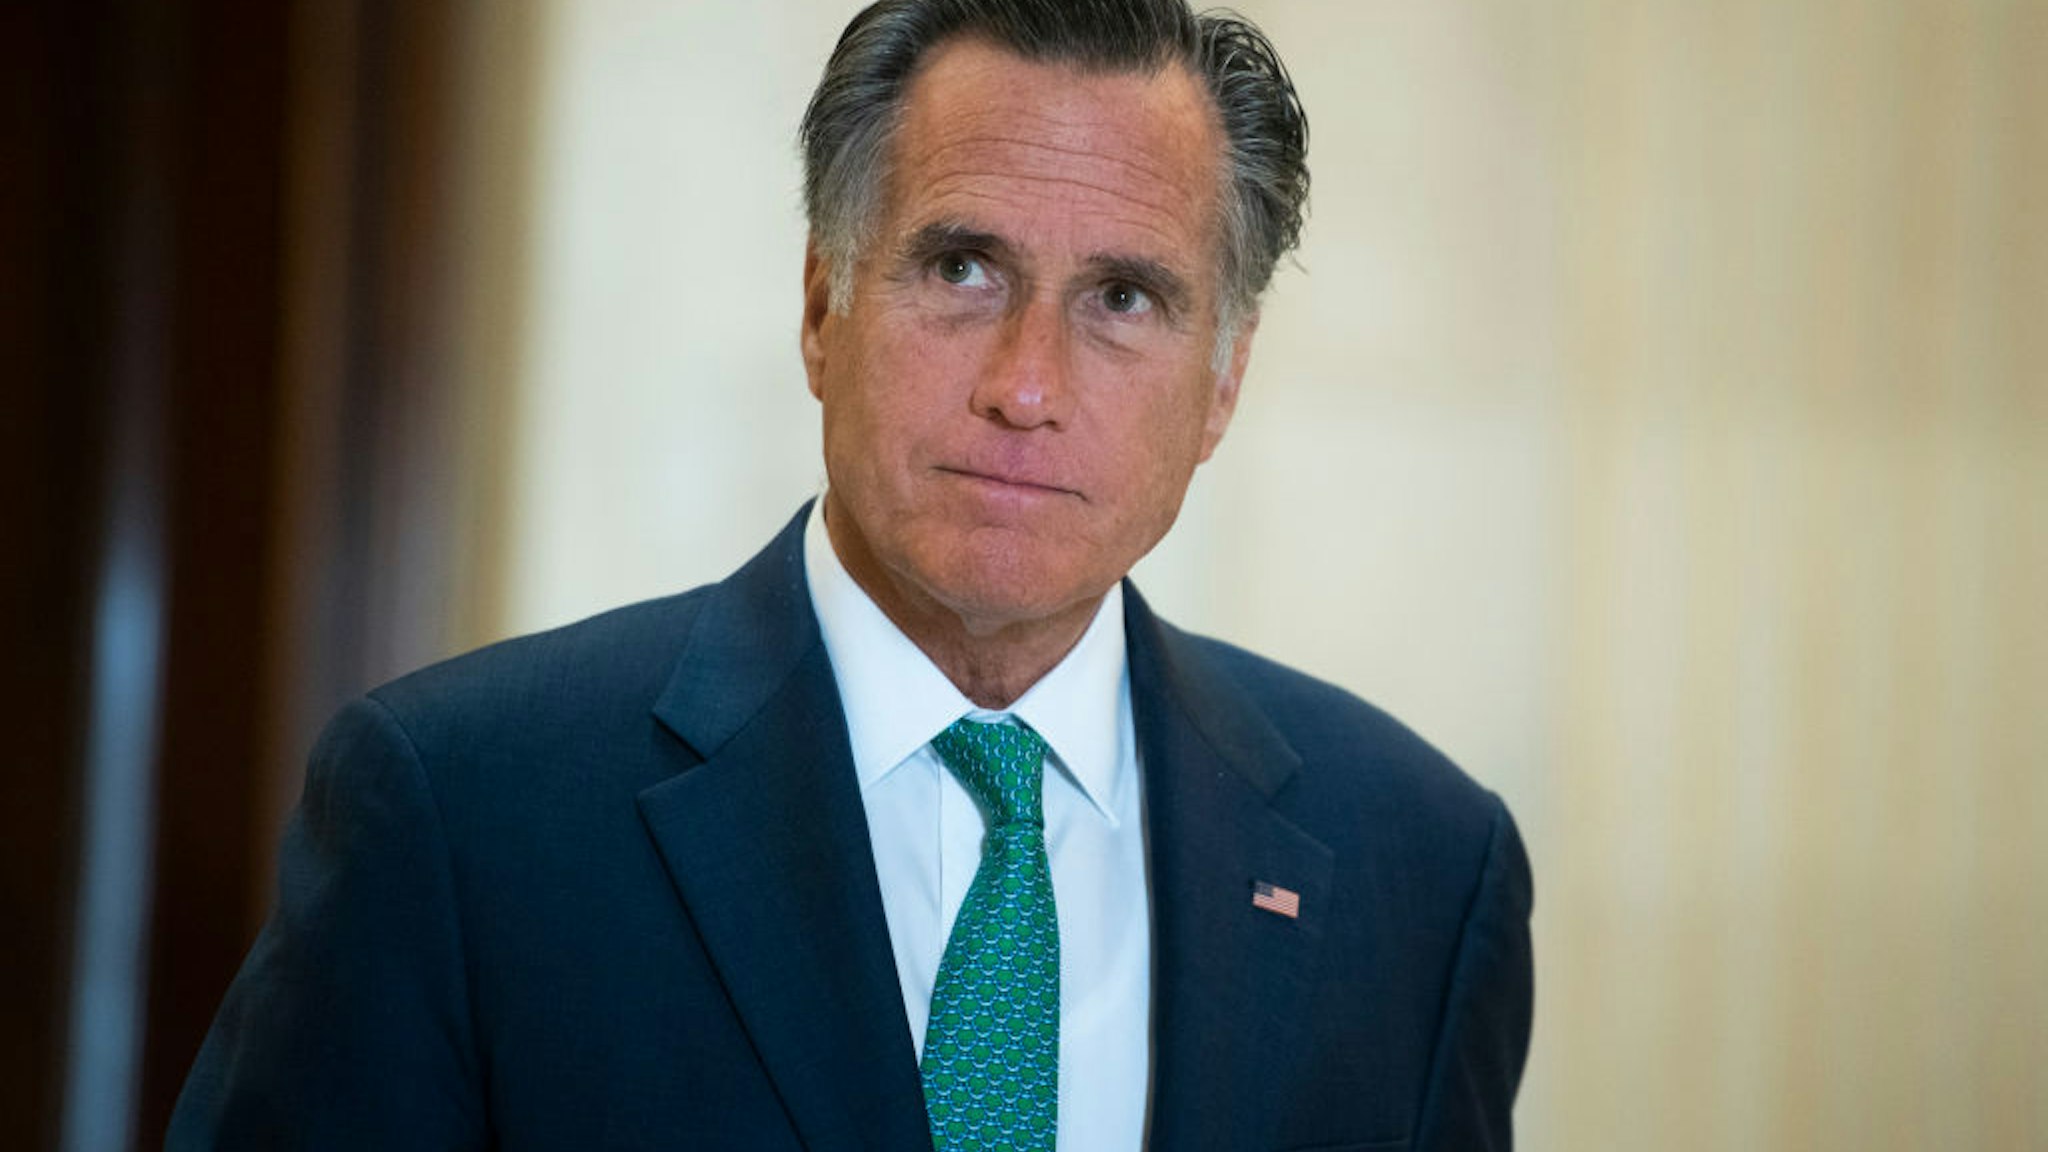 UNITED STATES - MARCH 17: Sen. Mitt Romney, R-Utah, leaves the Senate Republican Policy luncheon in Russell Building on Tuesday, March 17, 2020. Treasury Secretary Steven Mnuchin attended to discuss the coronavirus relief package. (Photo By Tom Williams/CQ-Roll Call, Inc via Getty Images)